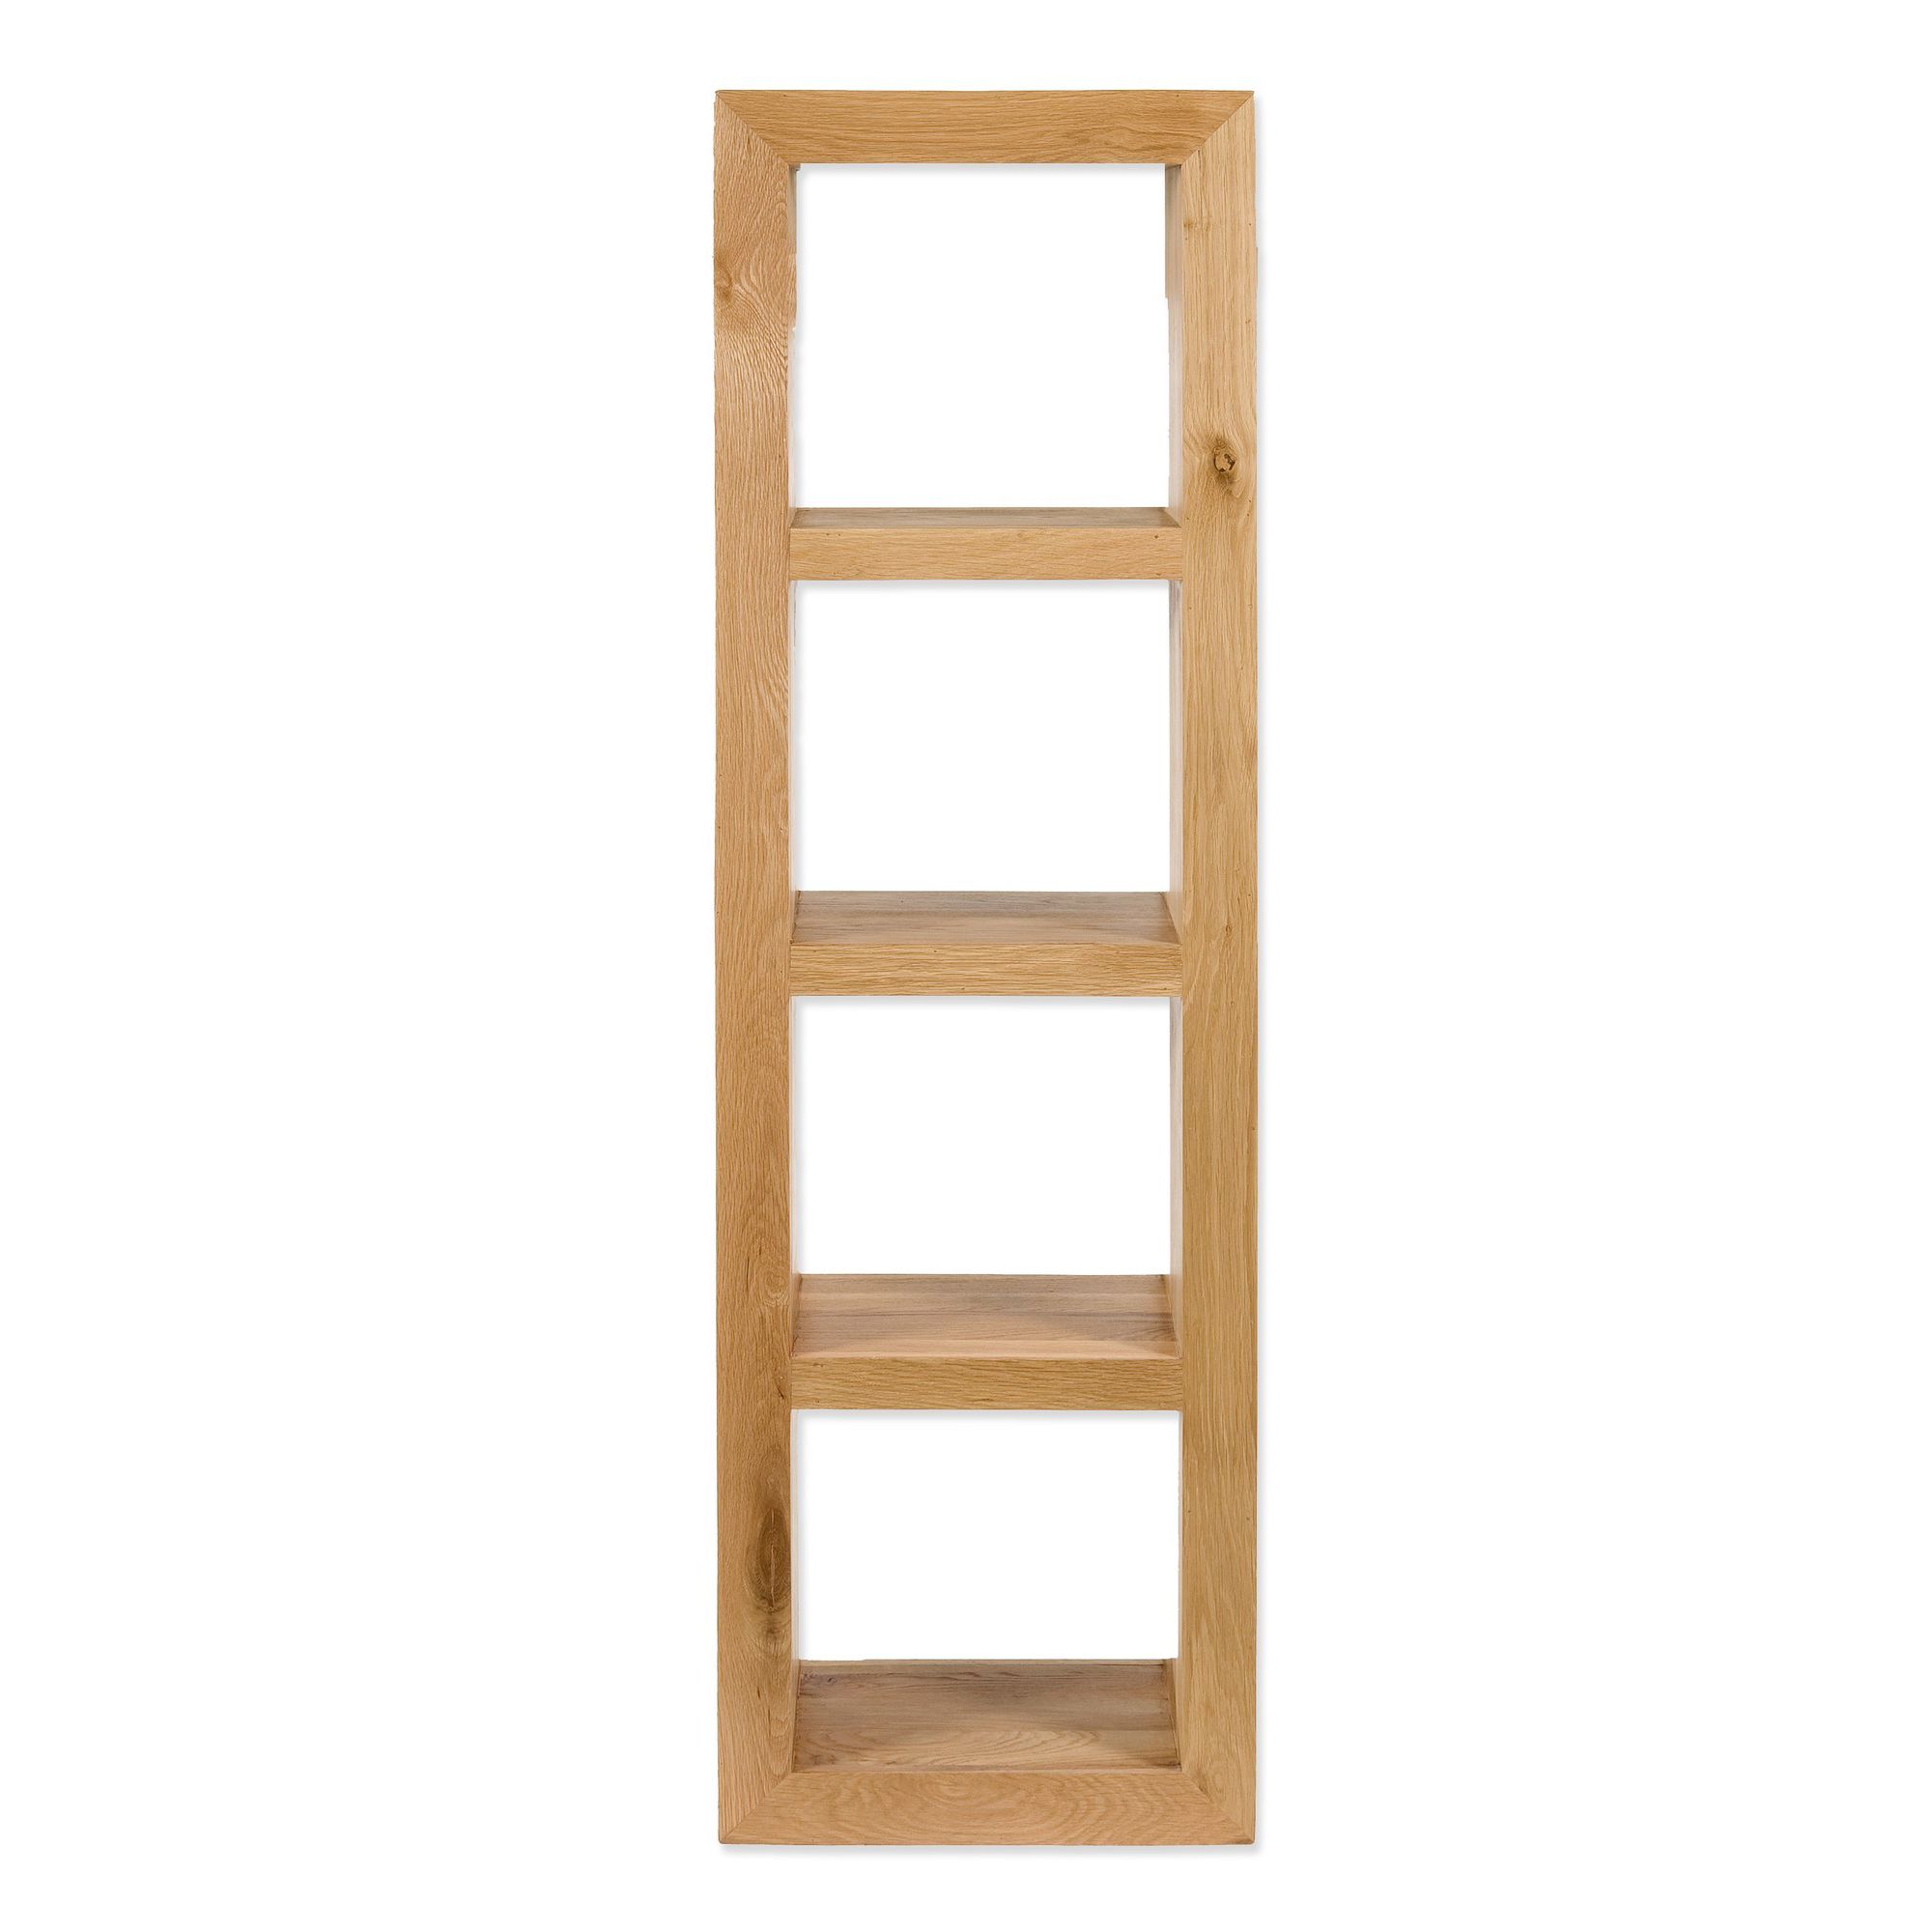 Elements Ashgrove Four Hole Vertical Shelving Unit in Natural Lacquer at Tesco Direct